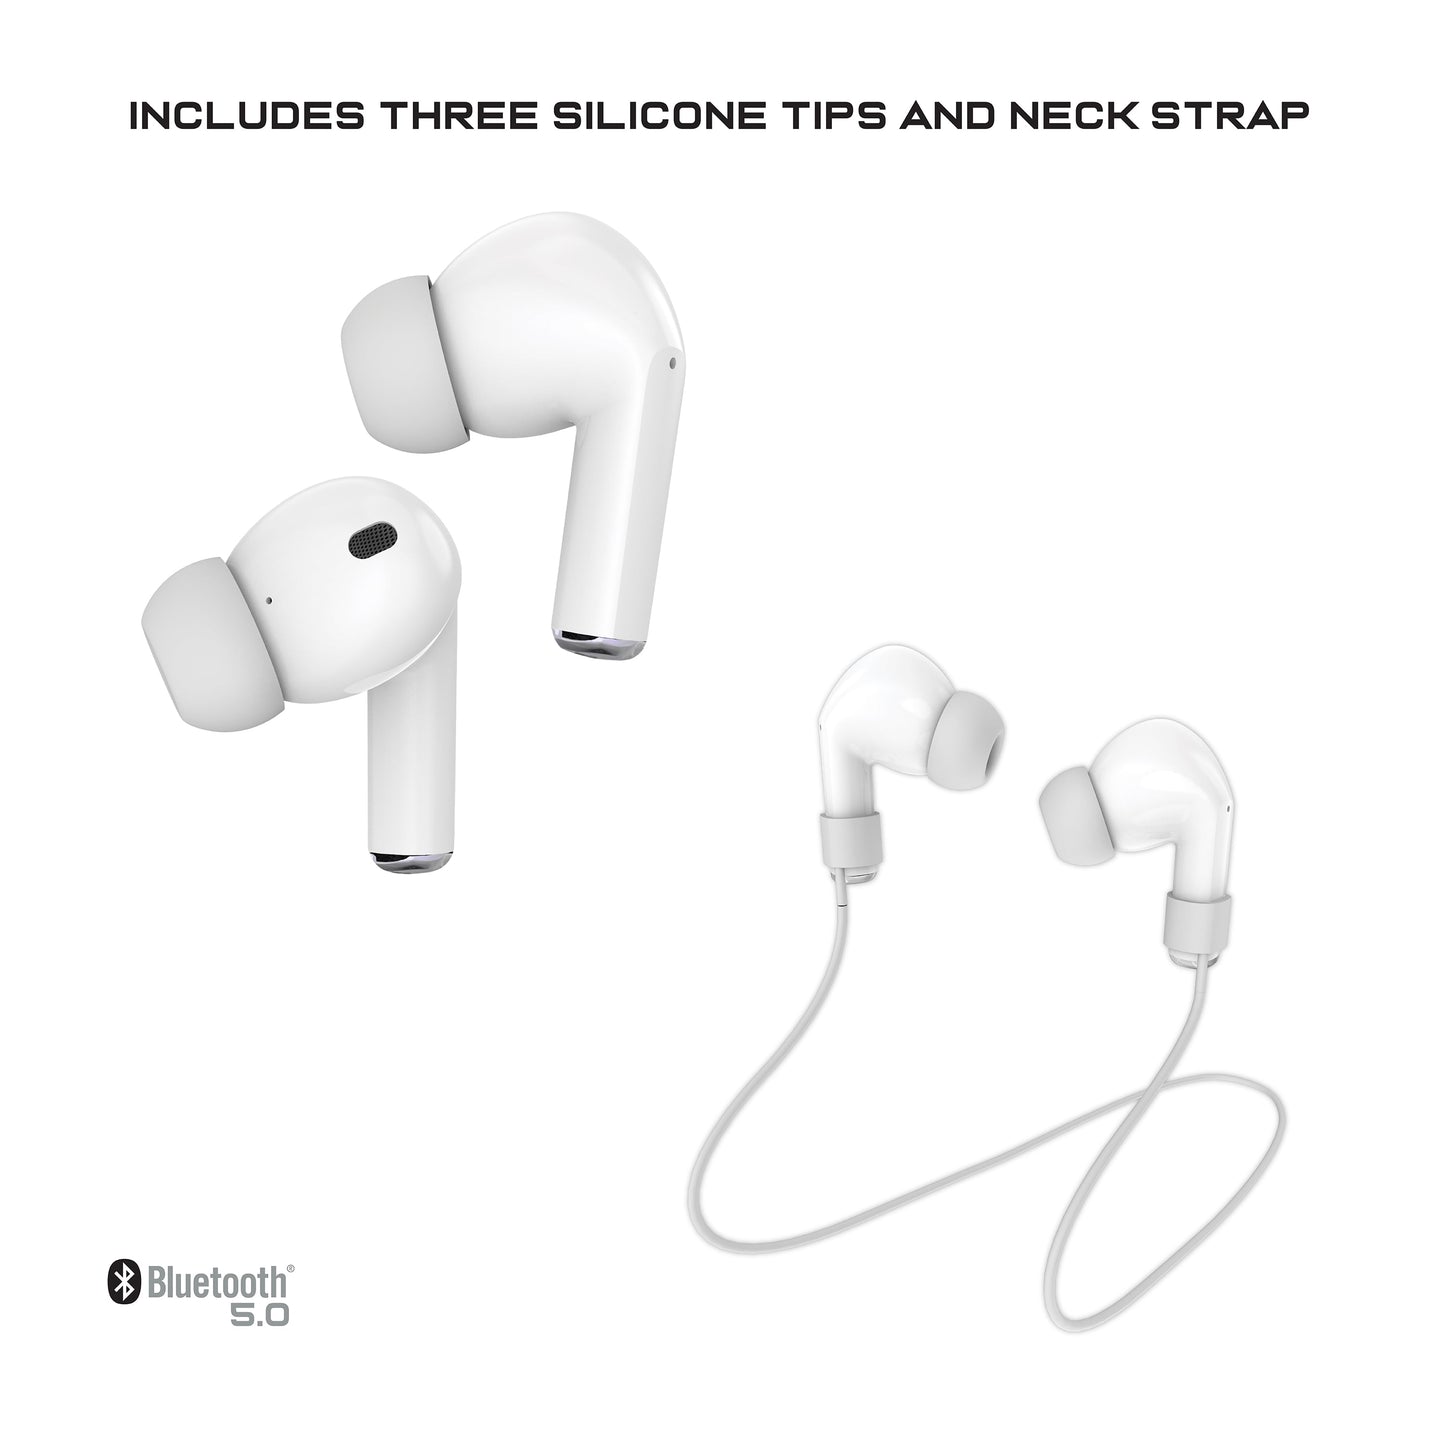 V2 – True Wireless Bluetooth Earbuds with Charging Case, Auto Pairing & Built-In Mic